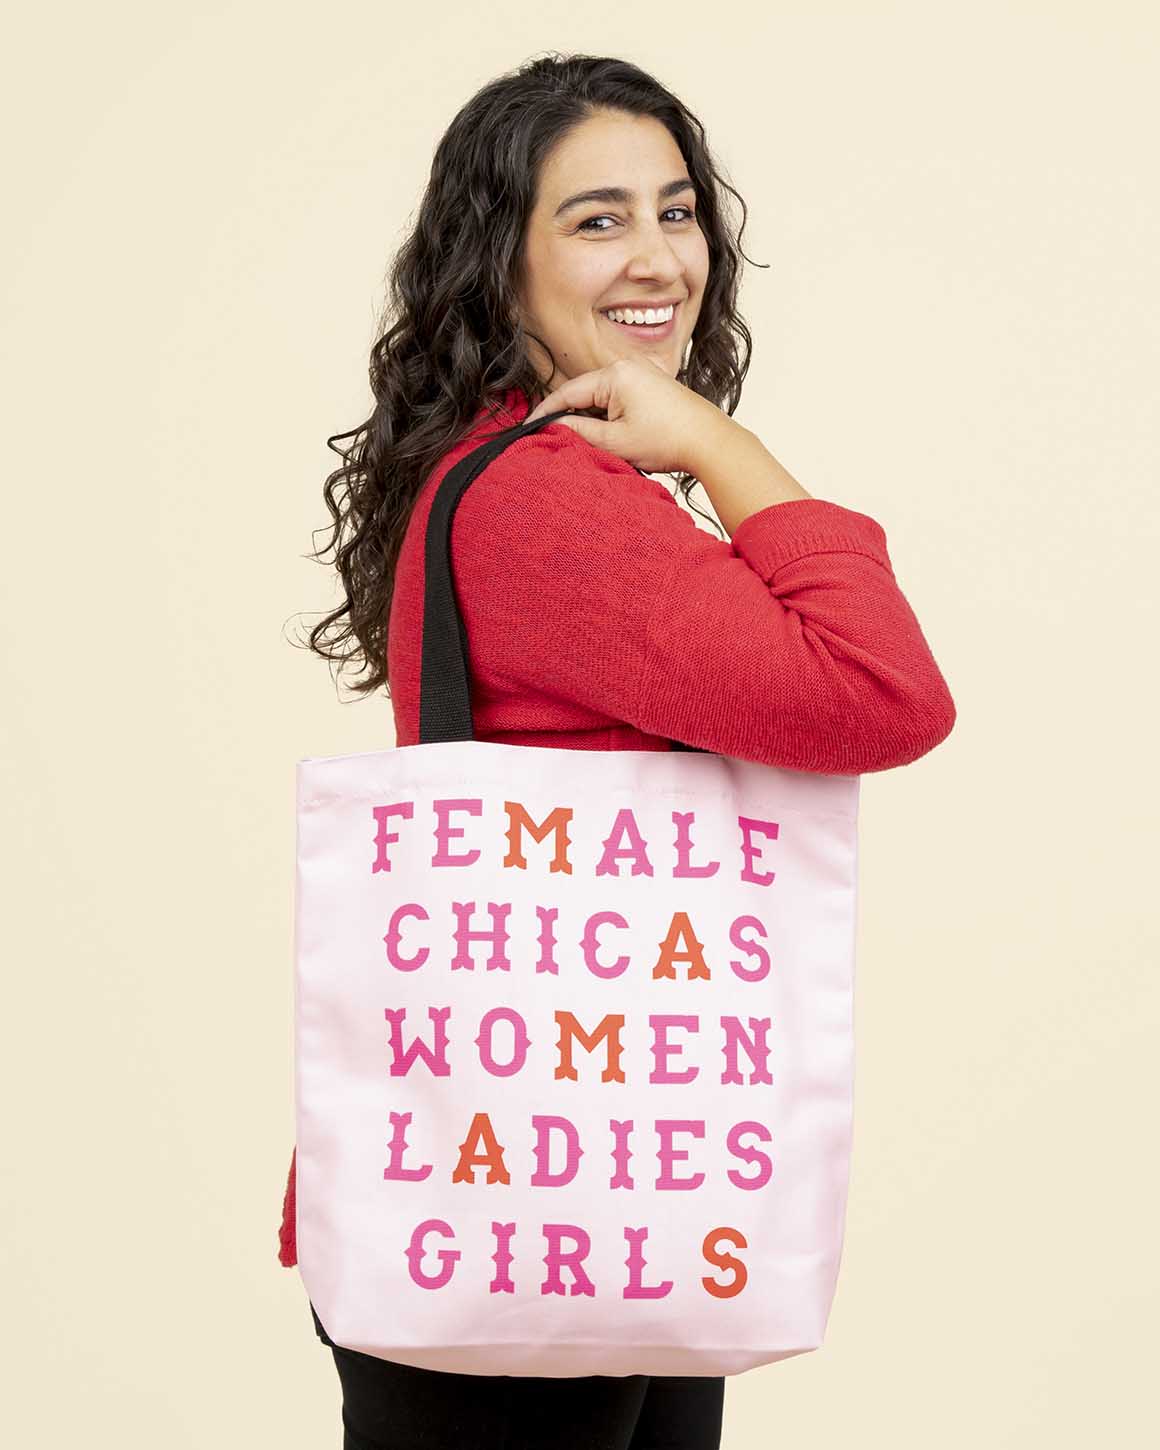 Women empowerment tote bag with Female Chicas Women Ladies Girls design in pink and red